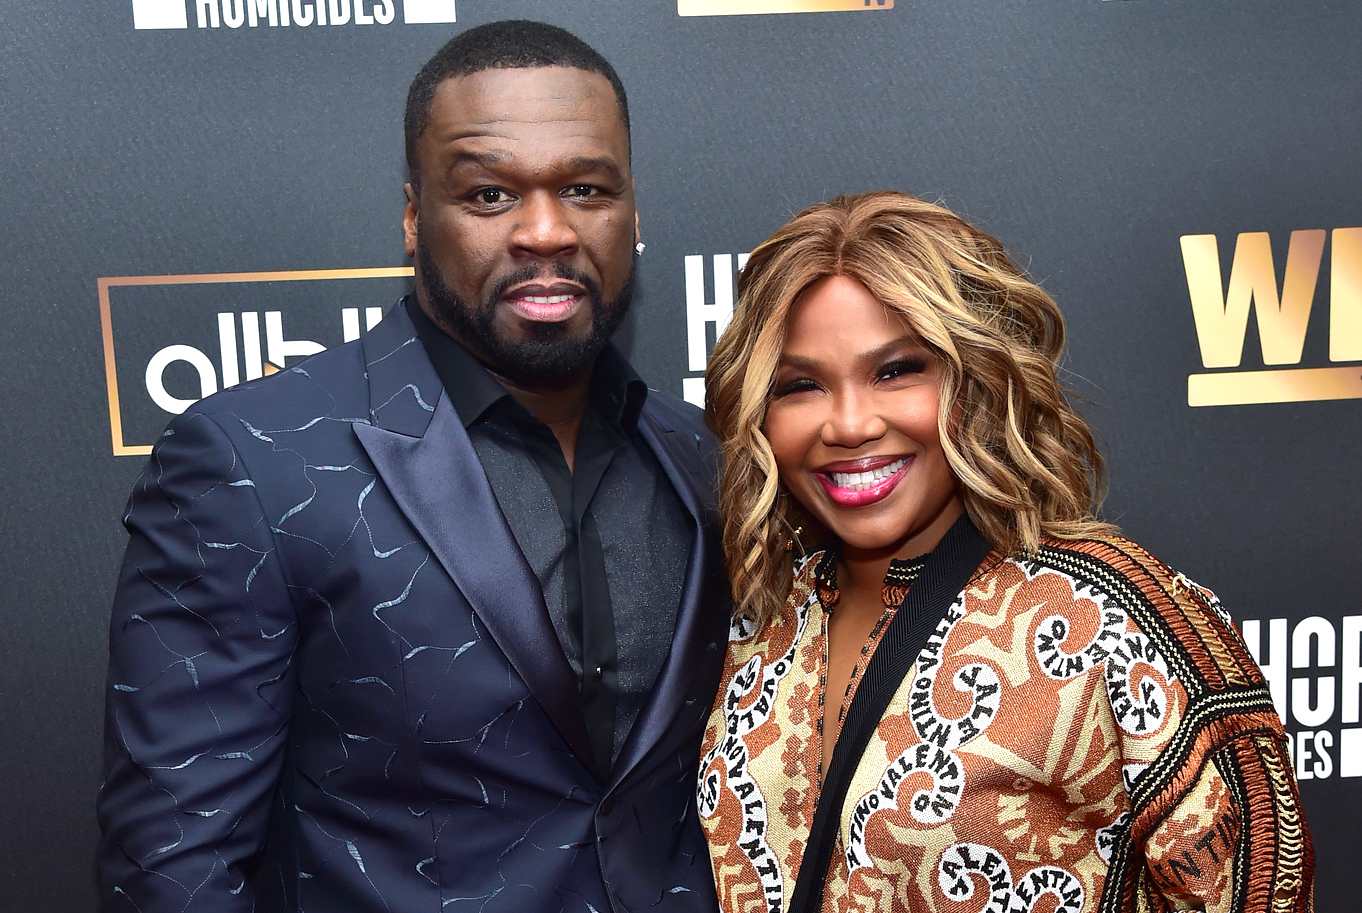 50 Cent and Mona Scott Young at Hip Hop Homicides event NYC